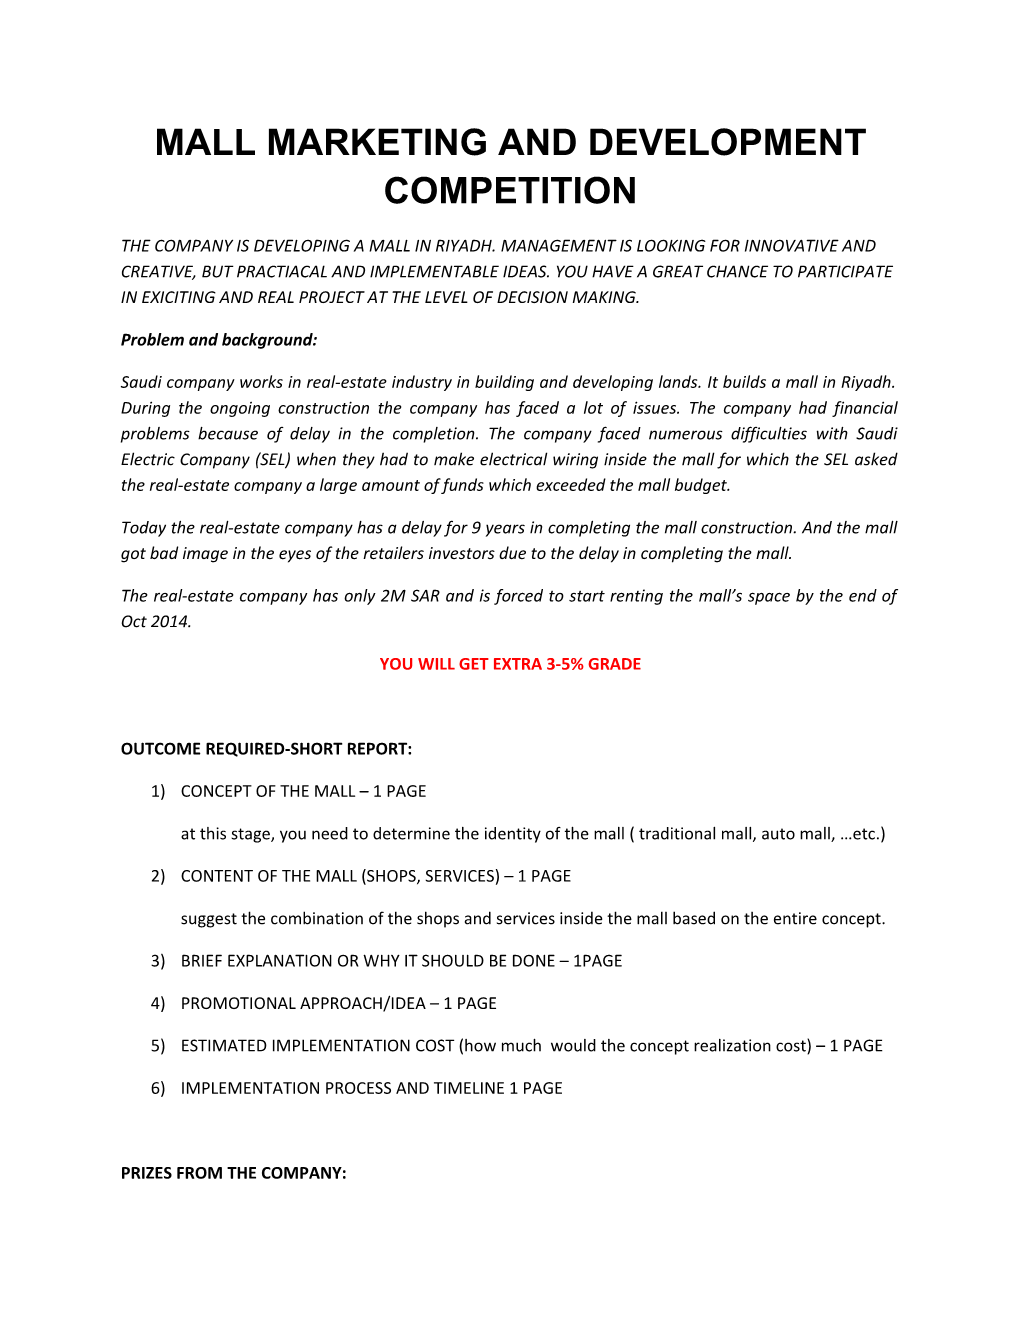 Mall Marketing and Development Competition